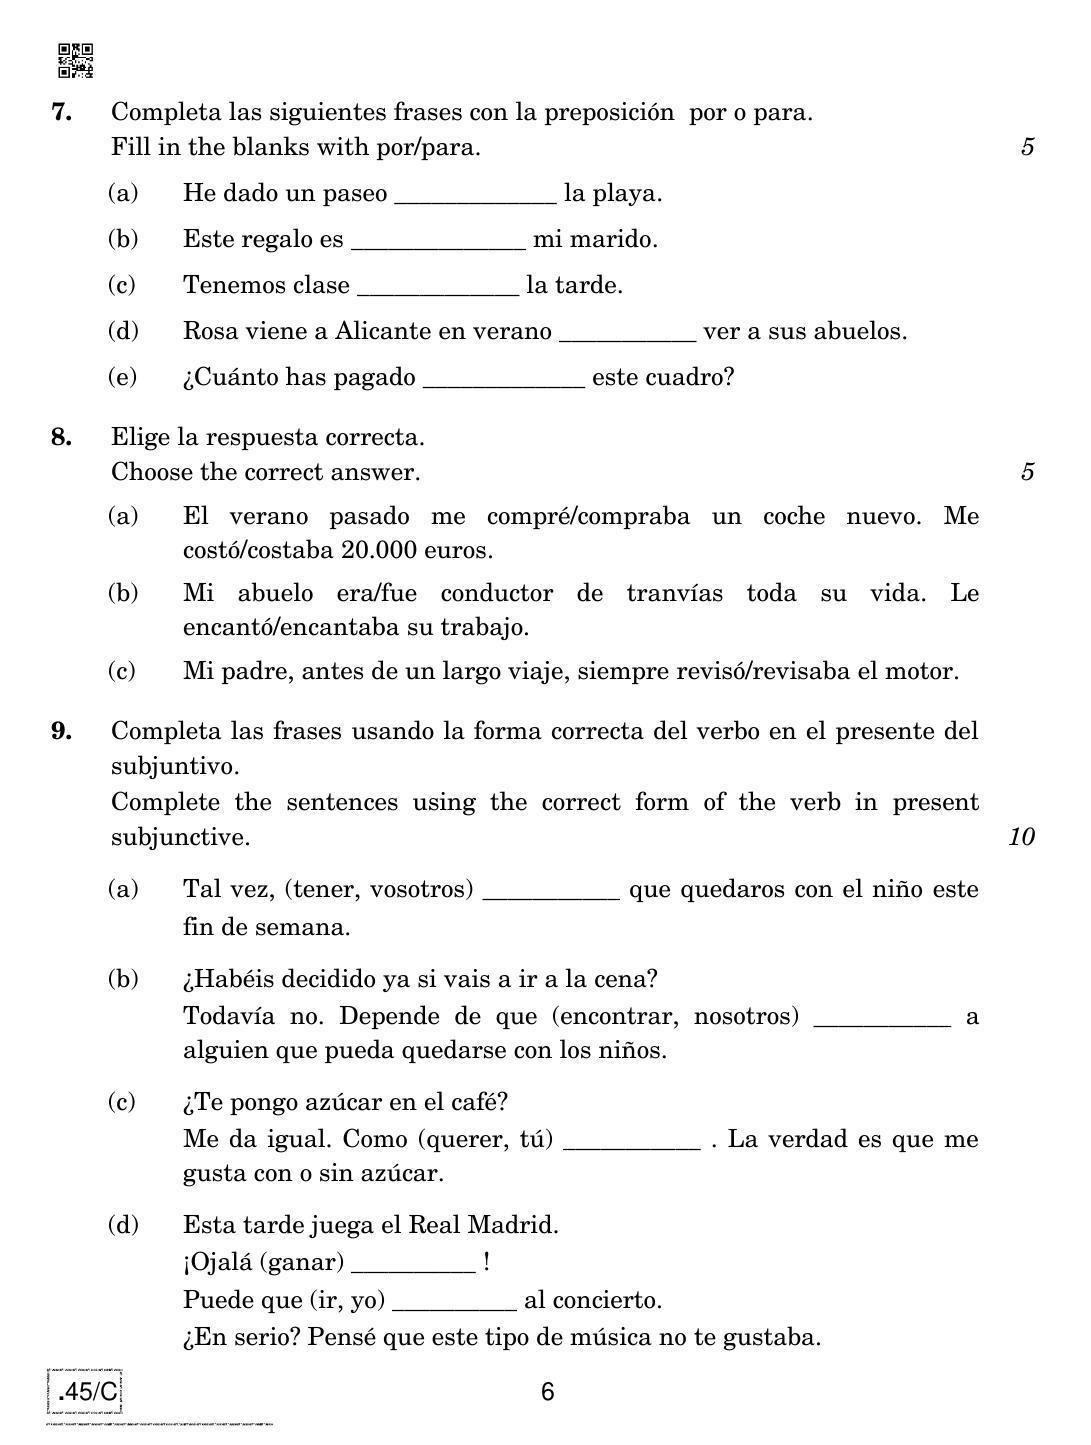 CBSE Class 10 Spanish 2020 Compartment Question Paper - Page 6